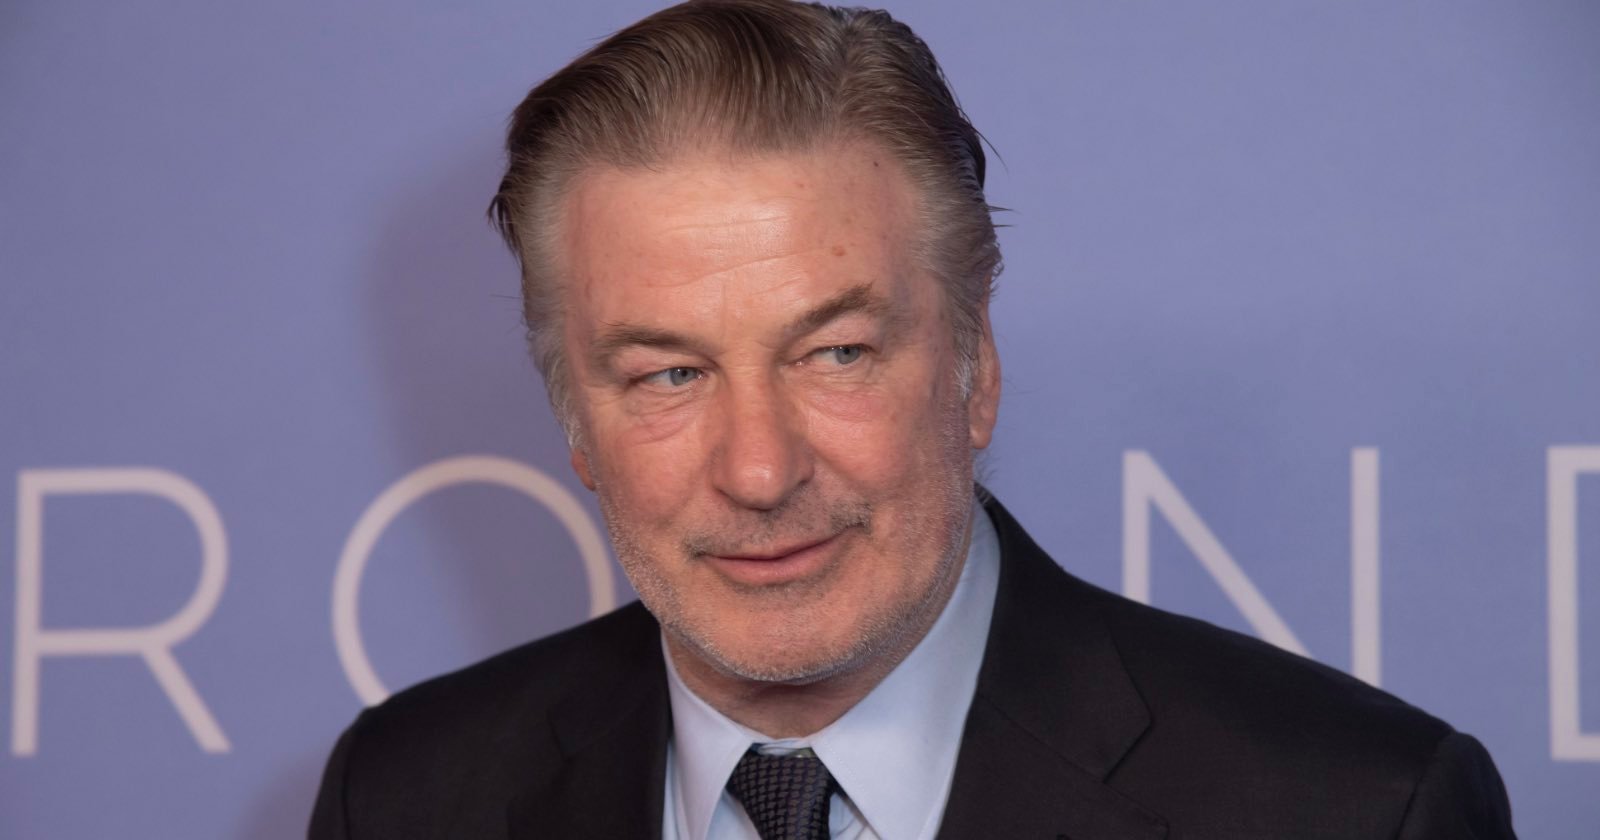 Alec Baldwin is Charged Again For Fatal Shooting of Cinematographer